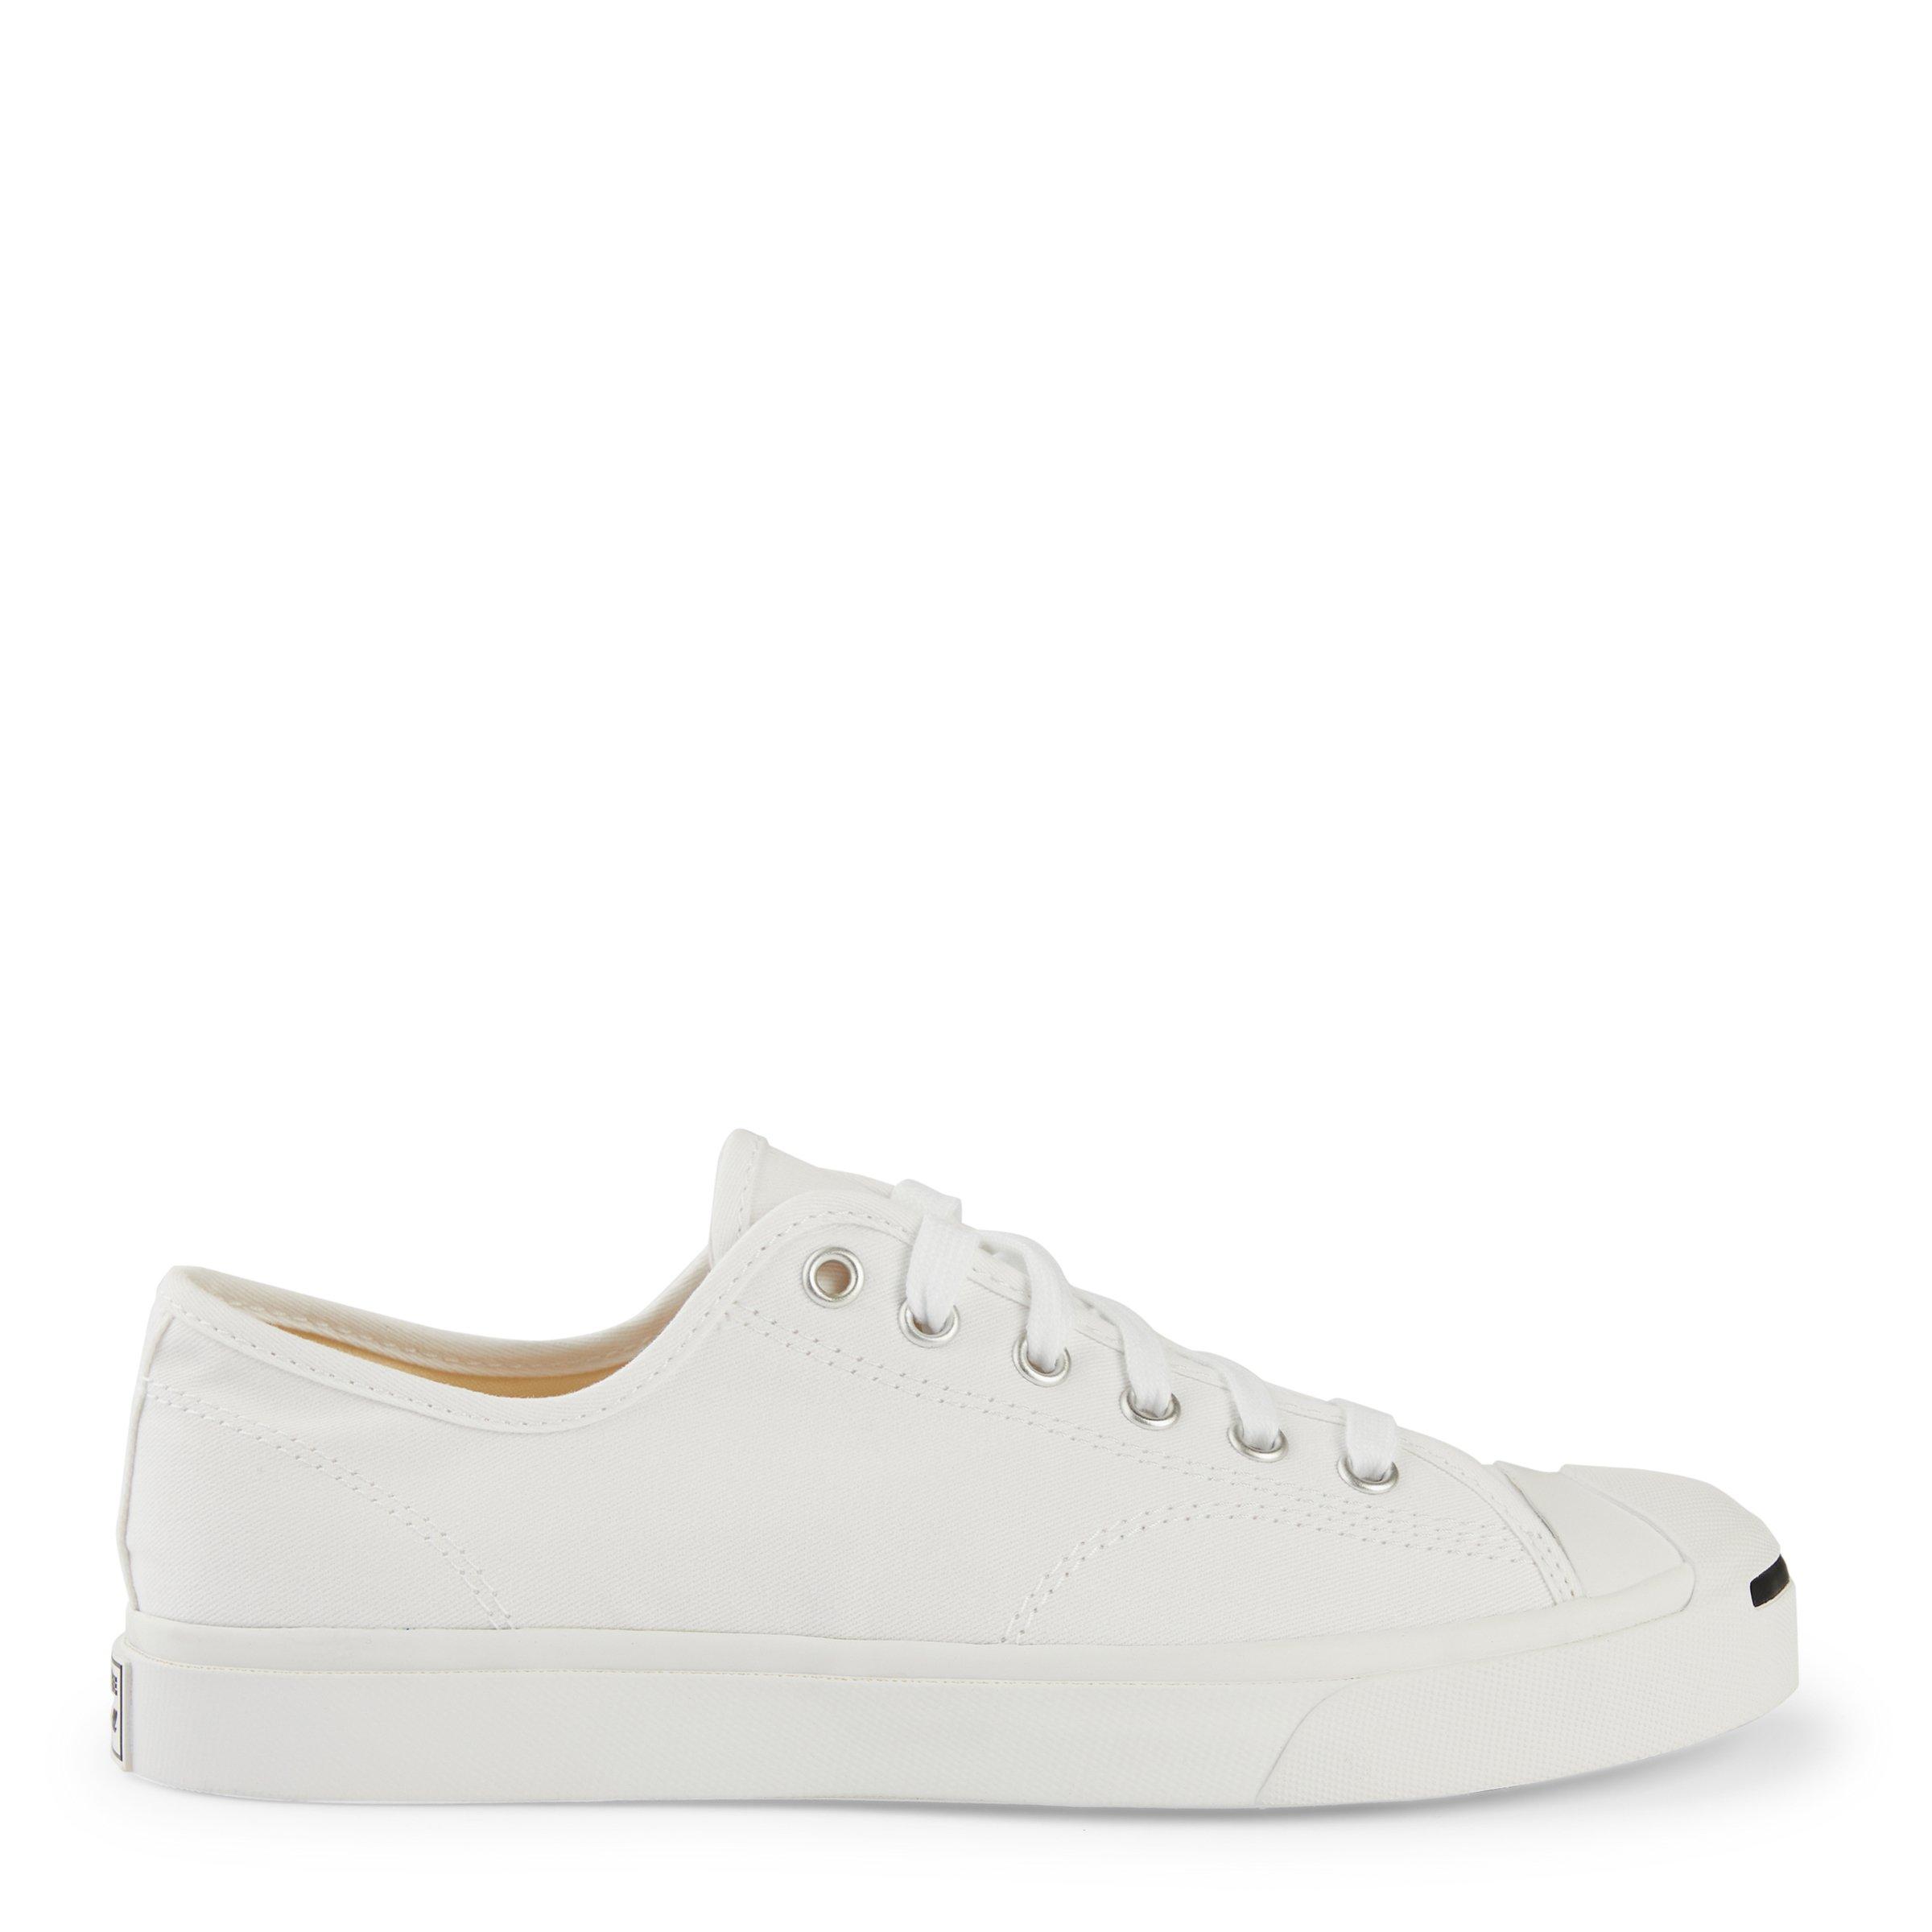 White Jack Purcell Sneakers (3141126) | Converse